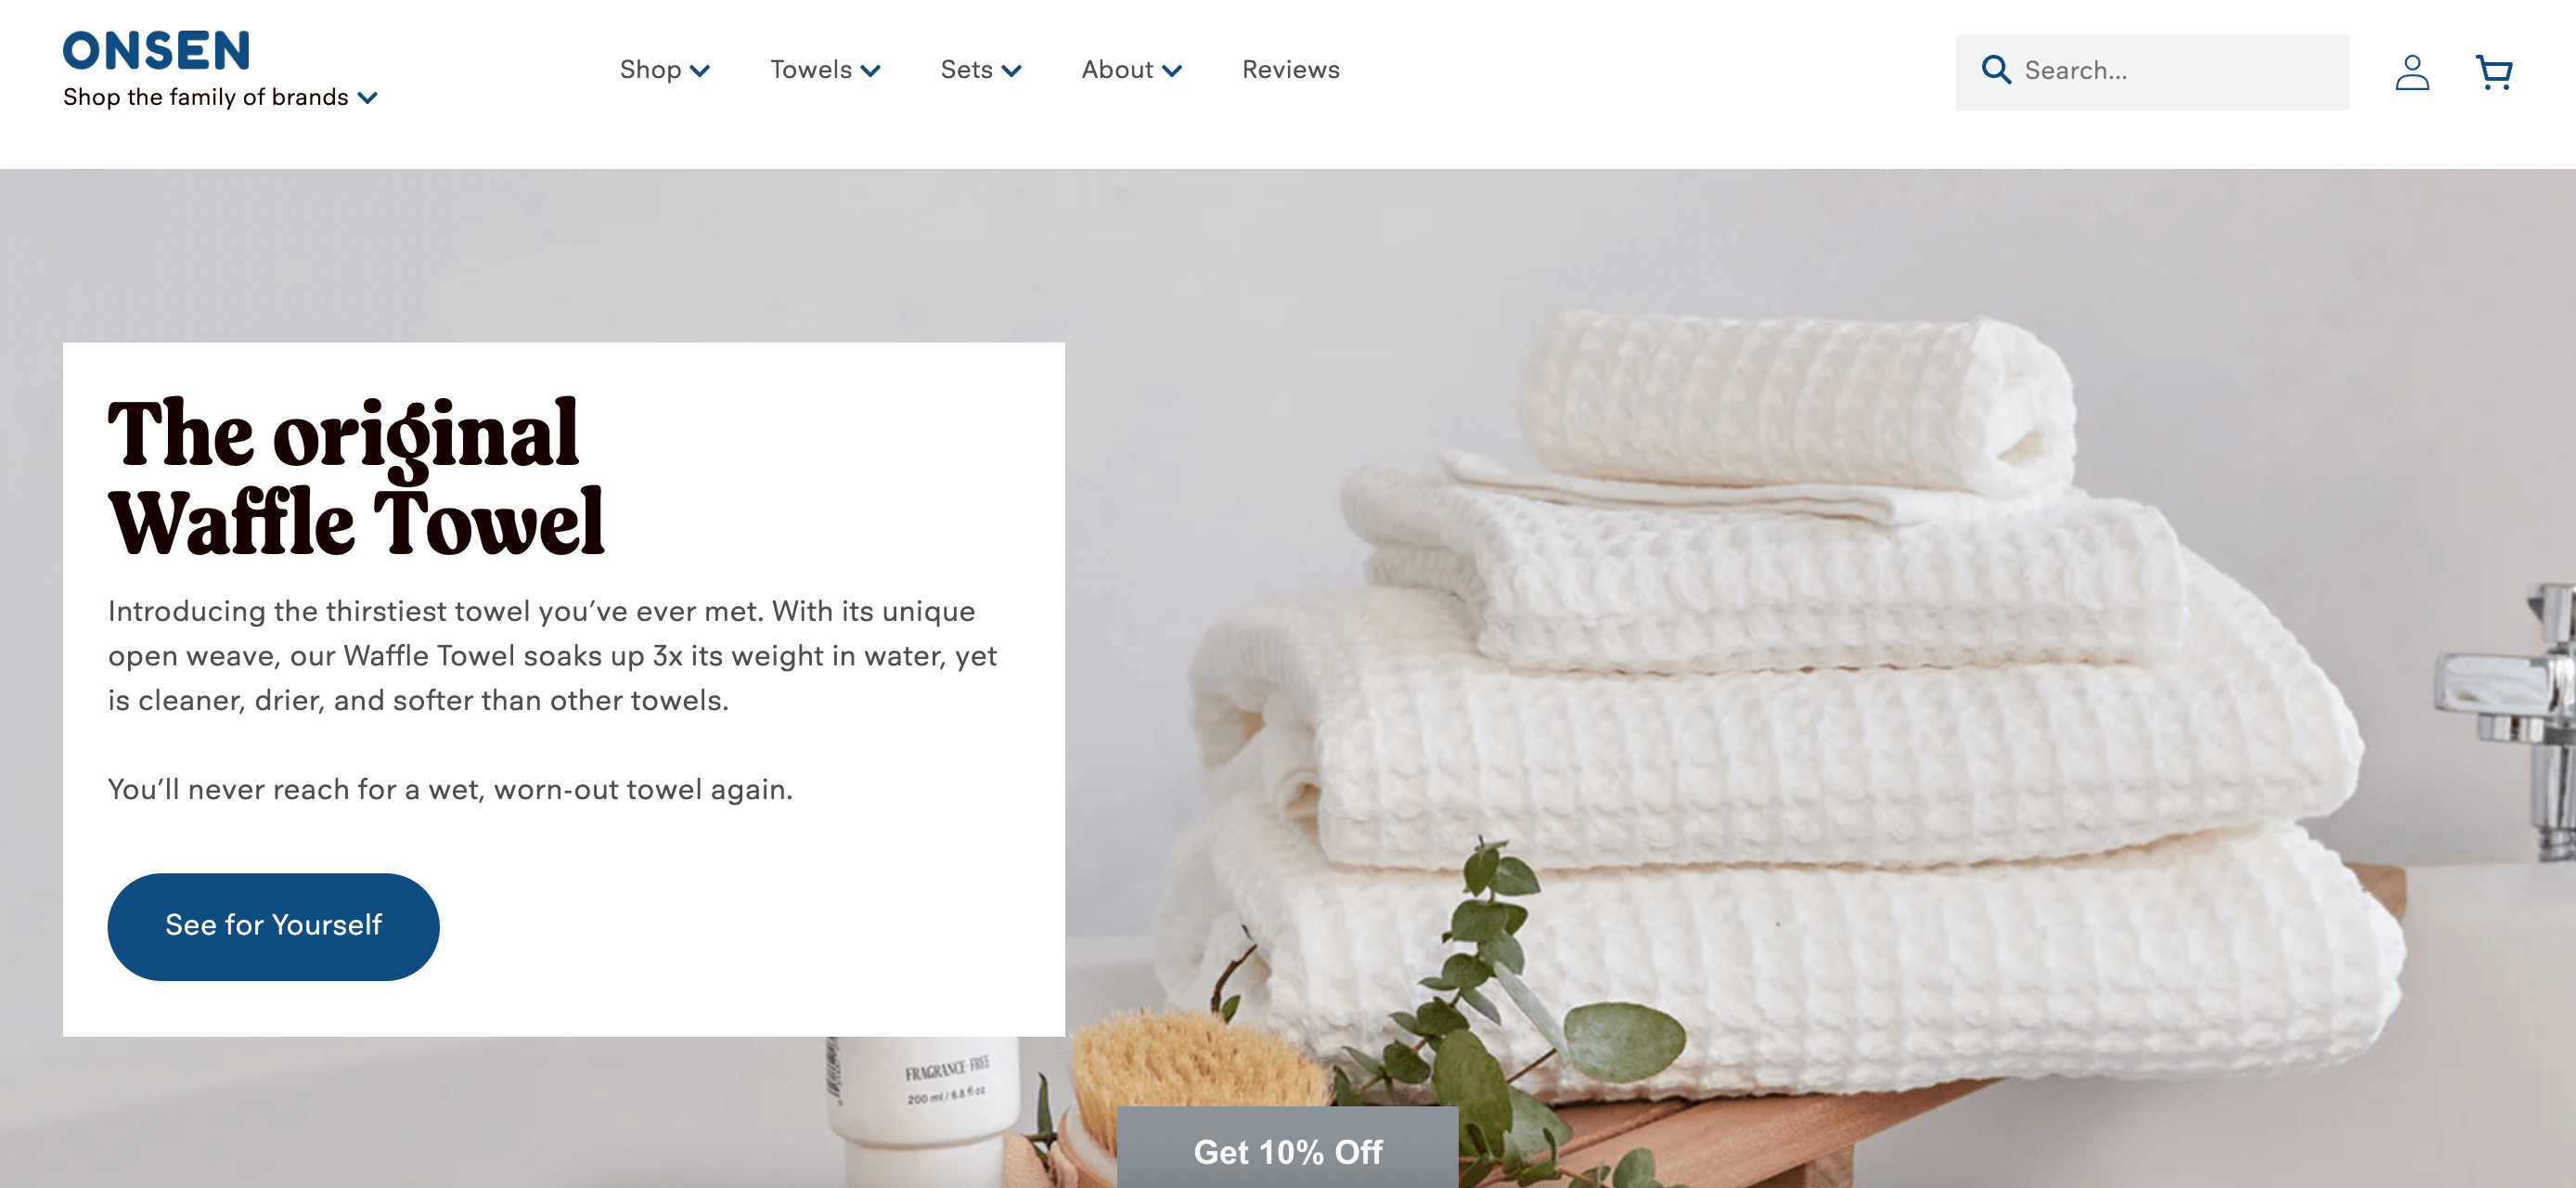 home and garden loyalty program examples - Onsen homepage screenshot